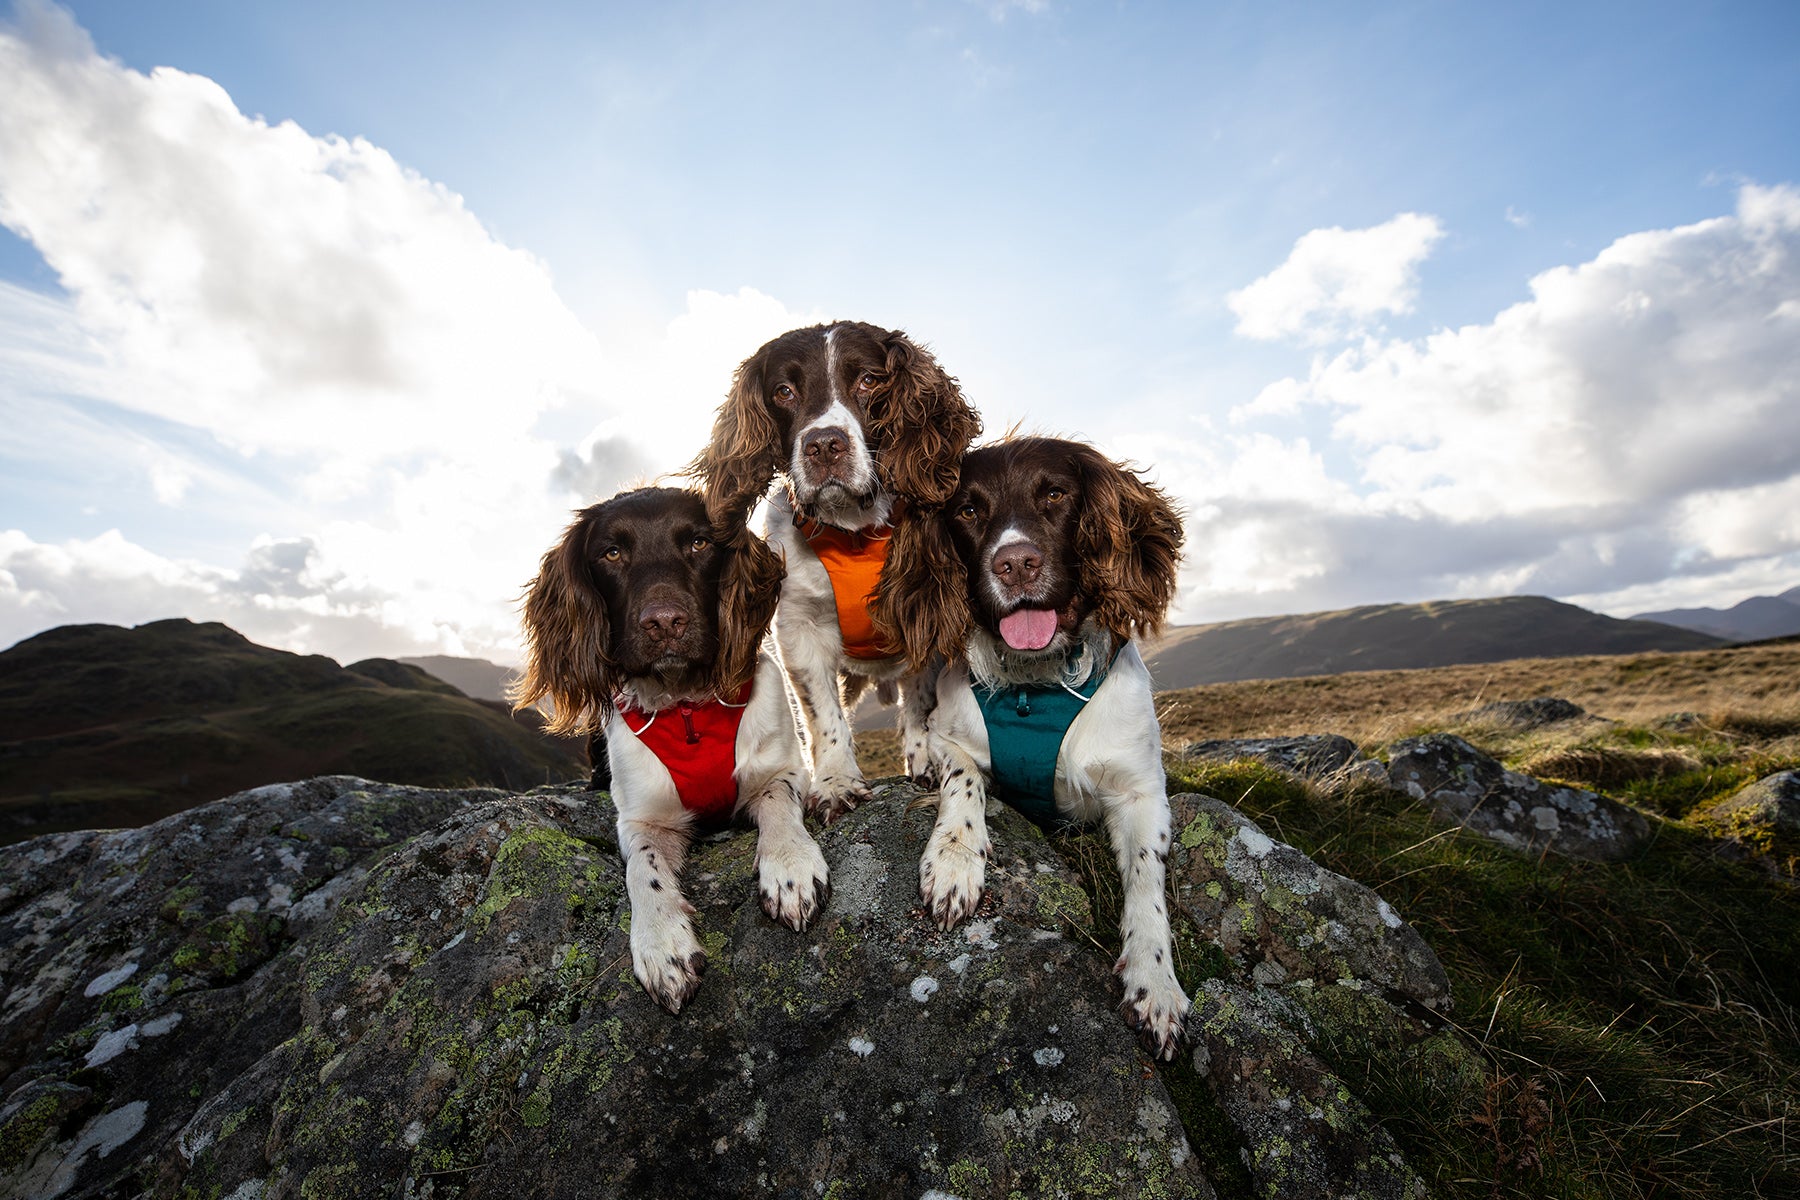 Kerry's three dogs in Ruffwear Front Range everyday padded dog harnesses laying side by side on rock.